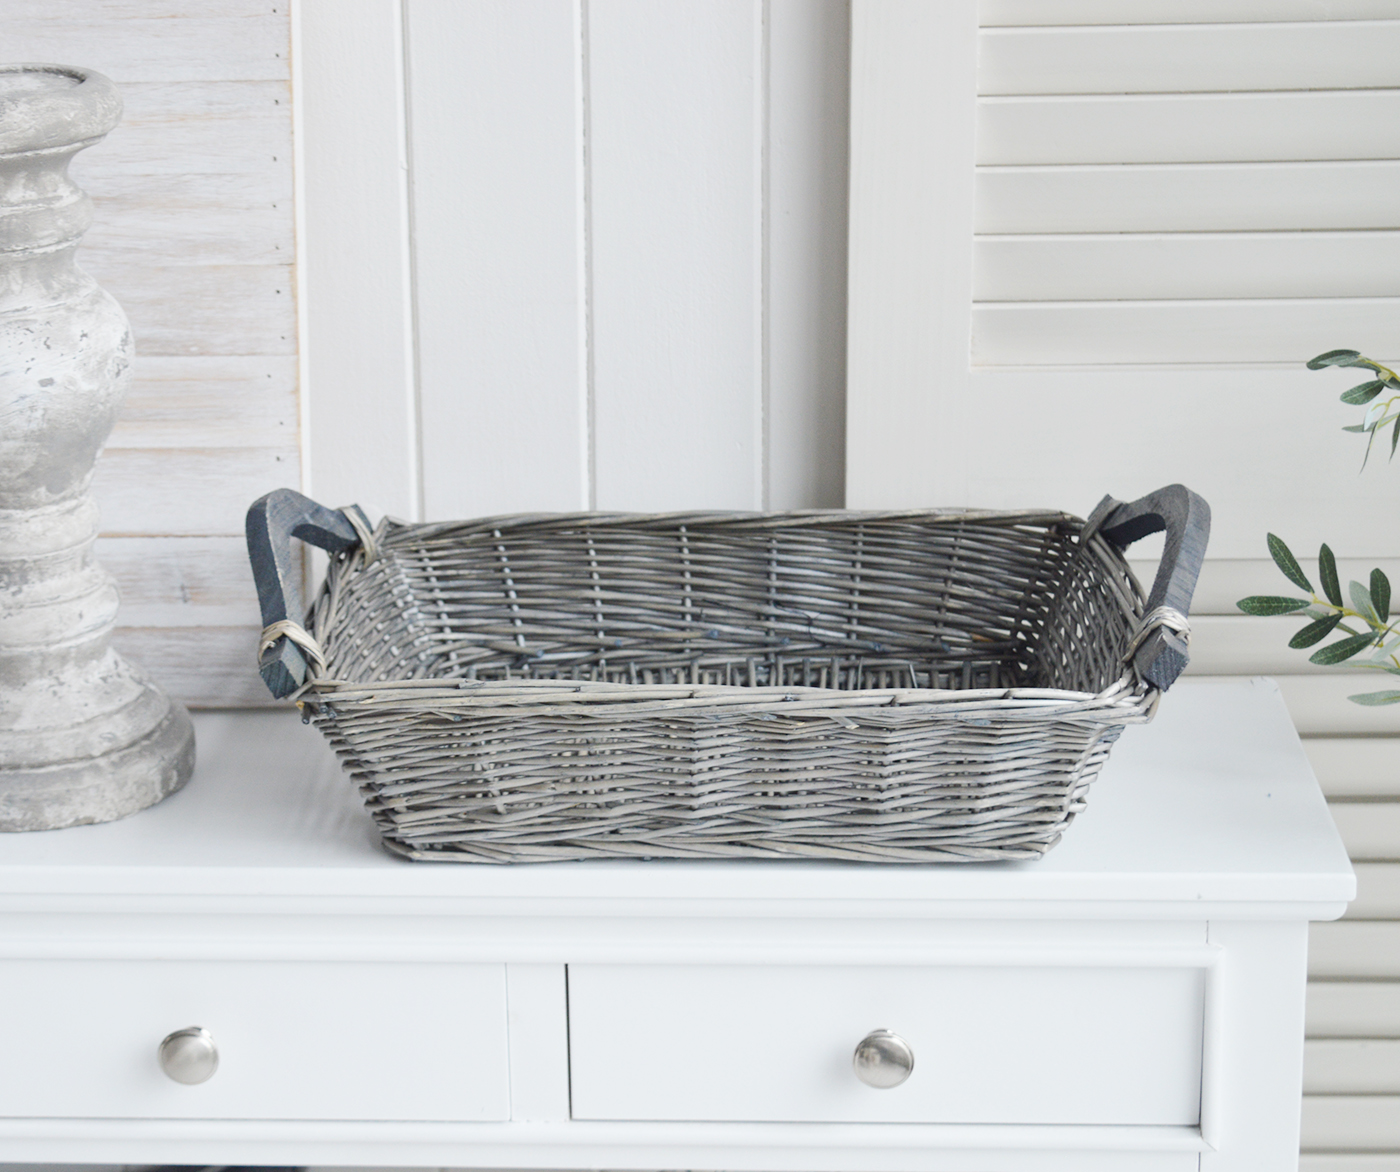 The White Lighthouse. White Furniture and accessories for the home. Windsor grey basket trayfor New England style interiors for country, coastal, city homes